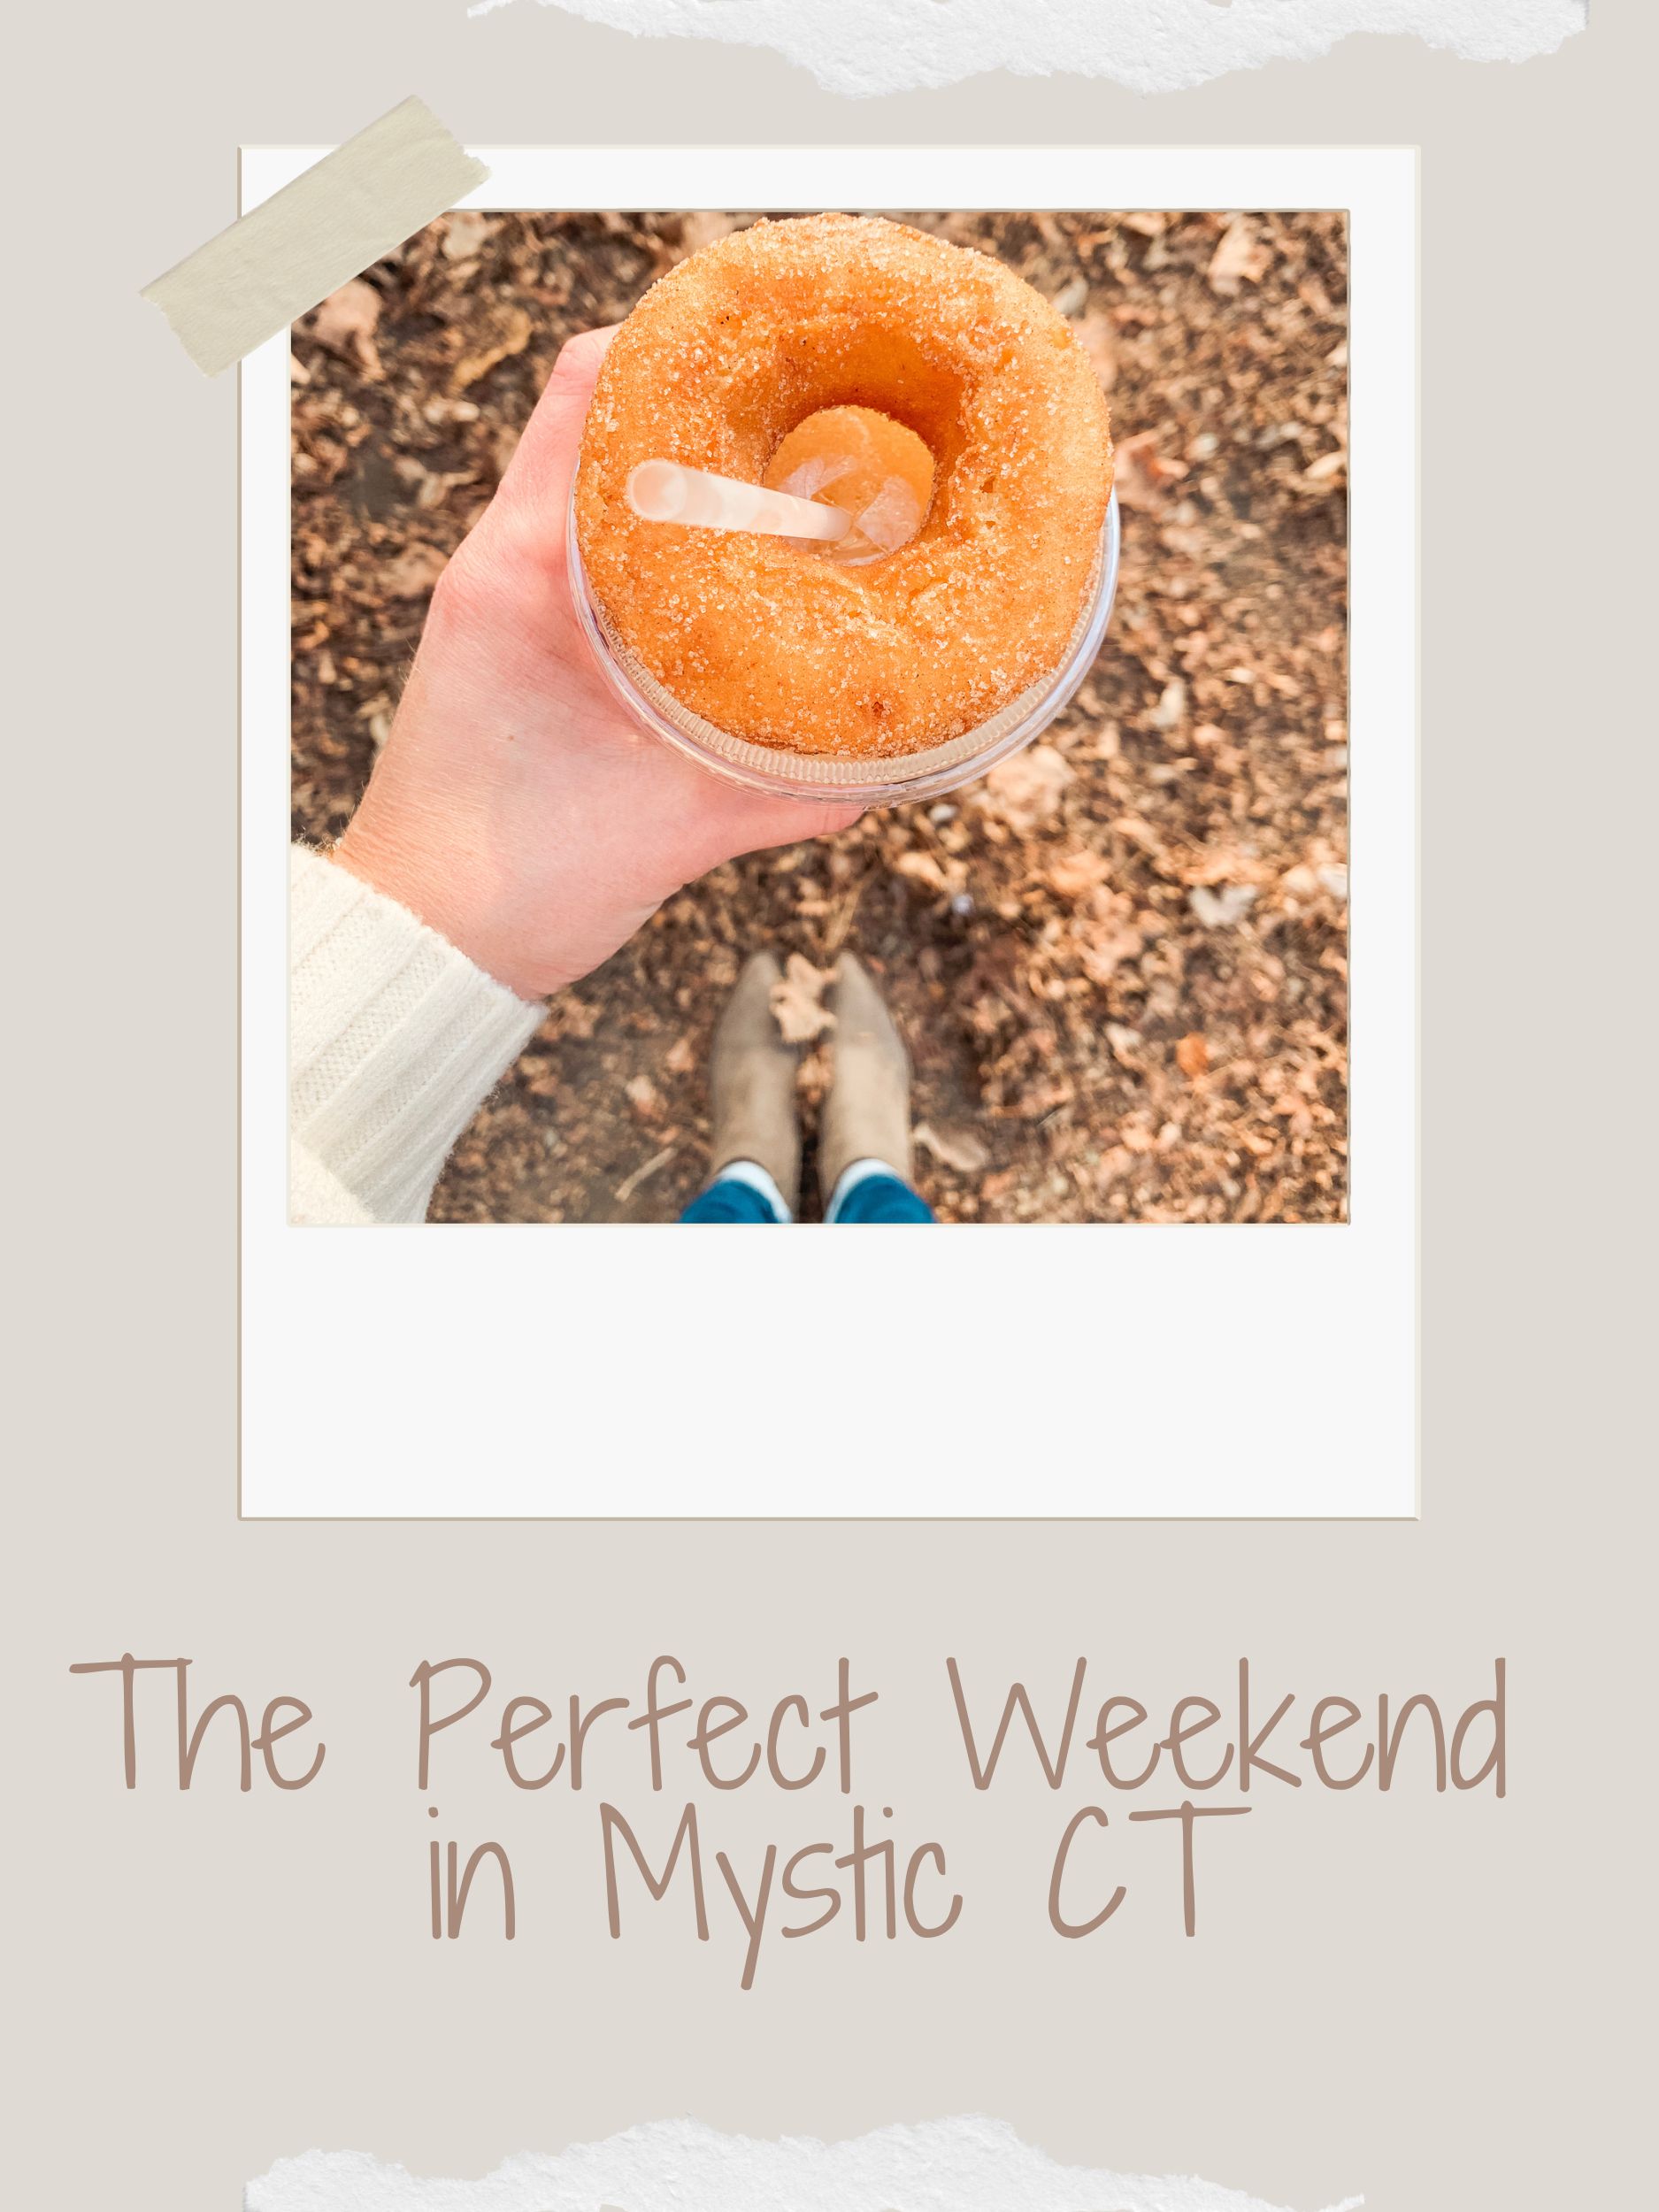 The Perfect Weekend in Mystic CT